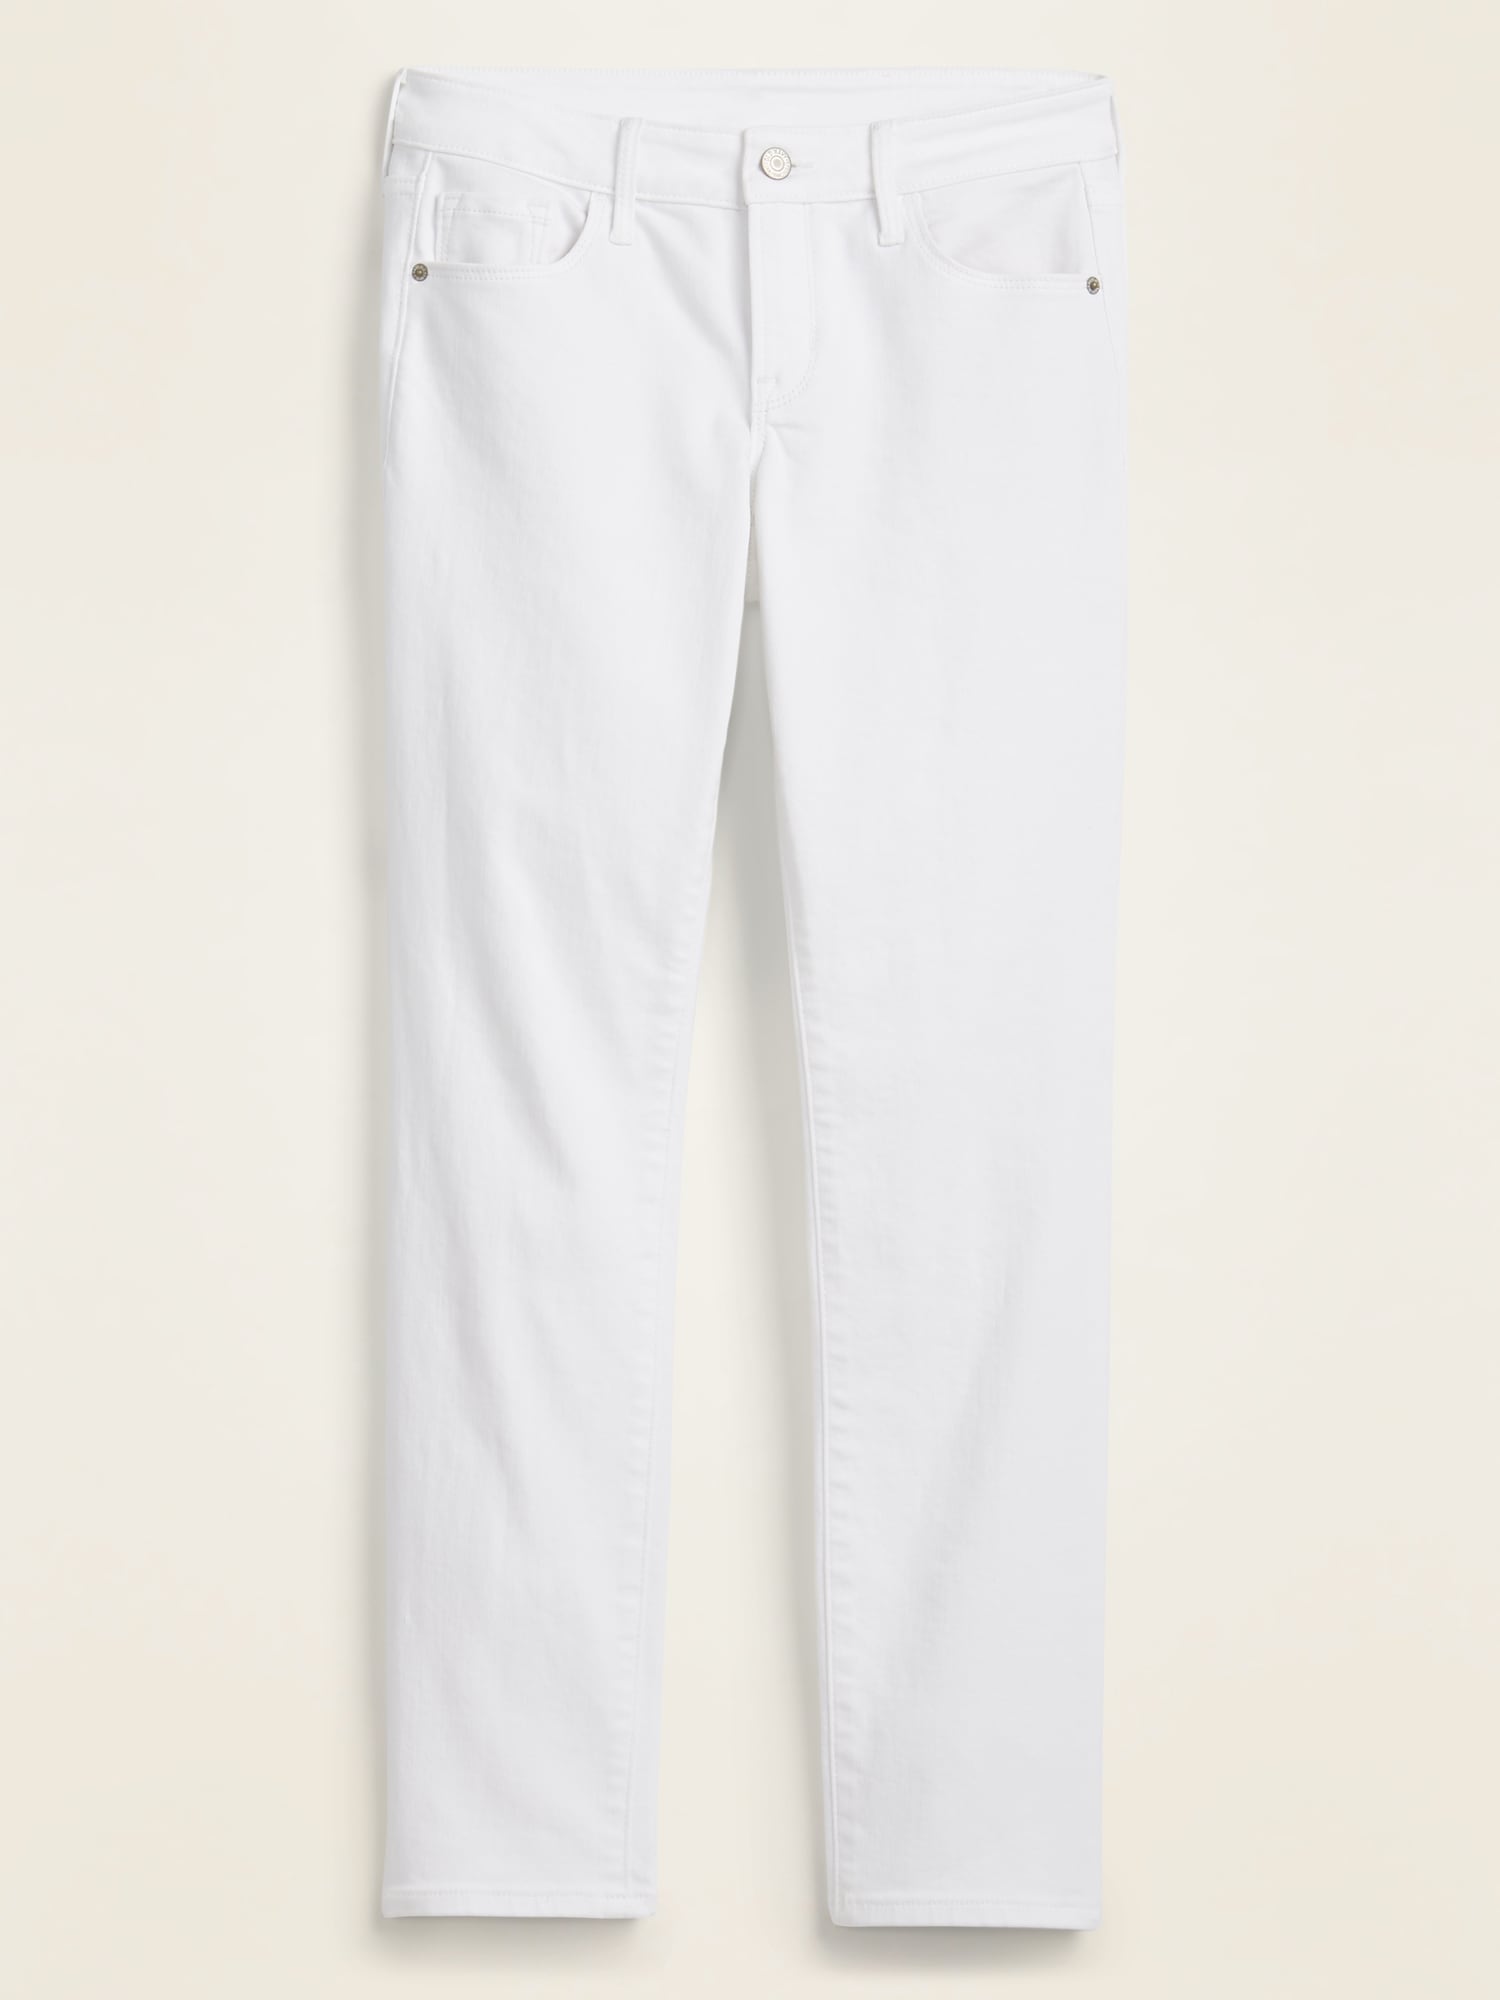 low rise white jeans womens